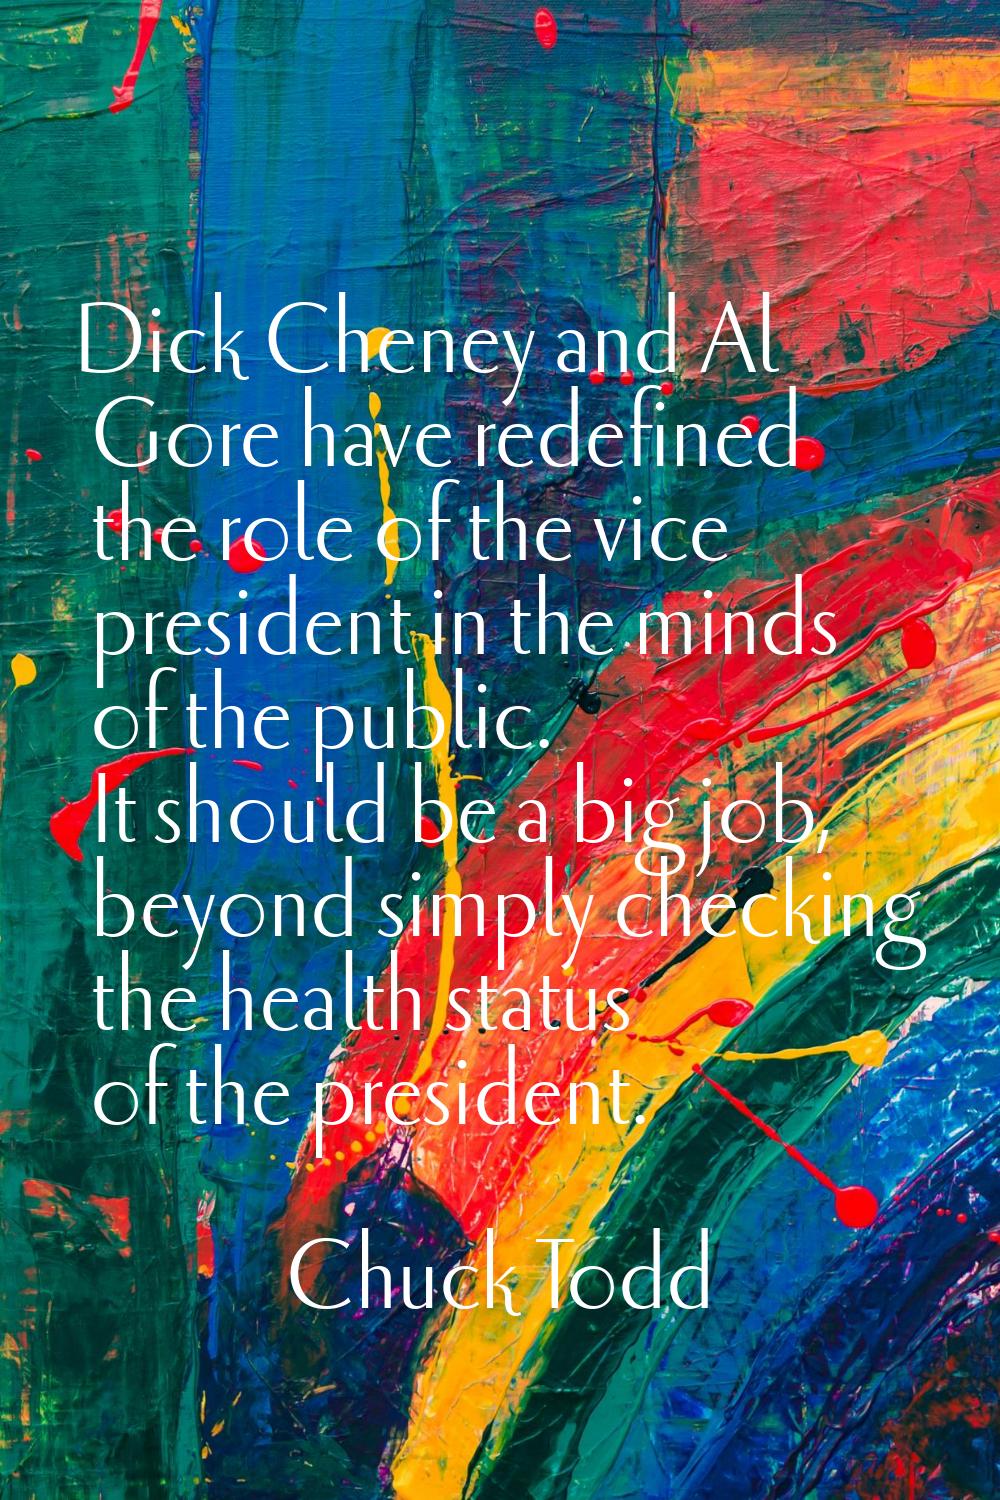 Dick Cheney and Al Gore have redefined the role of the vice president in the minds of the public. I